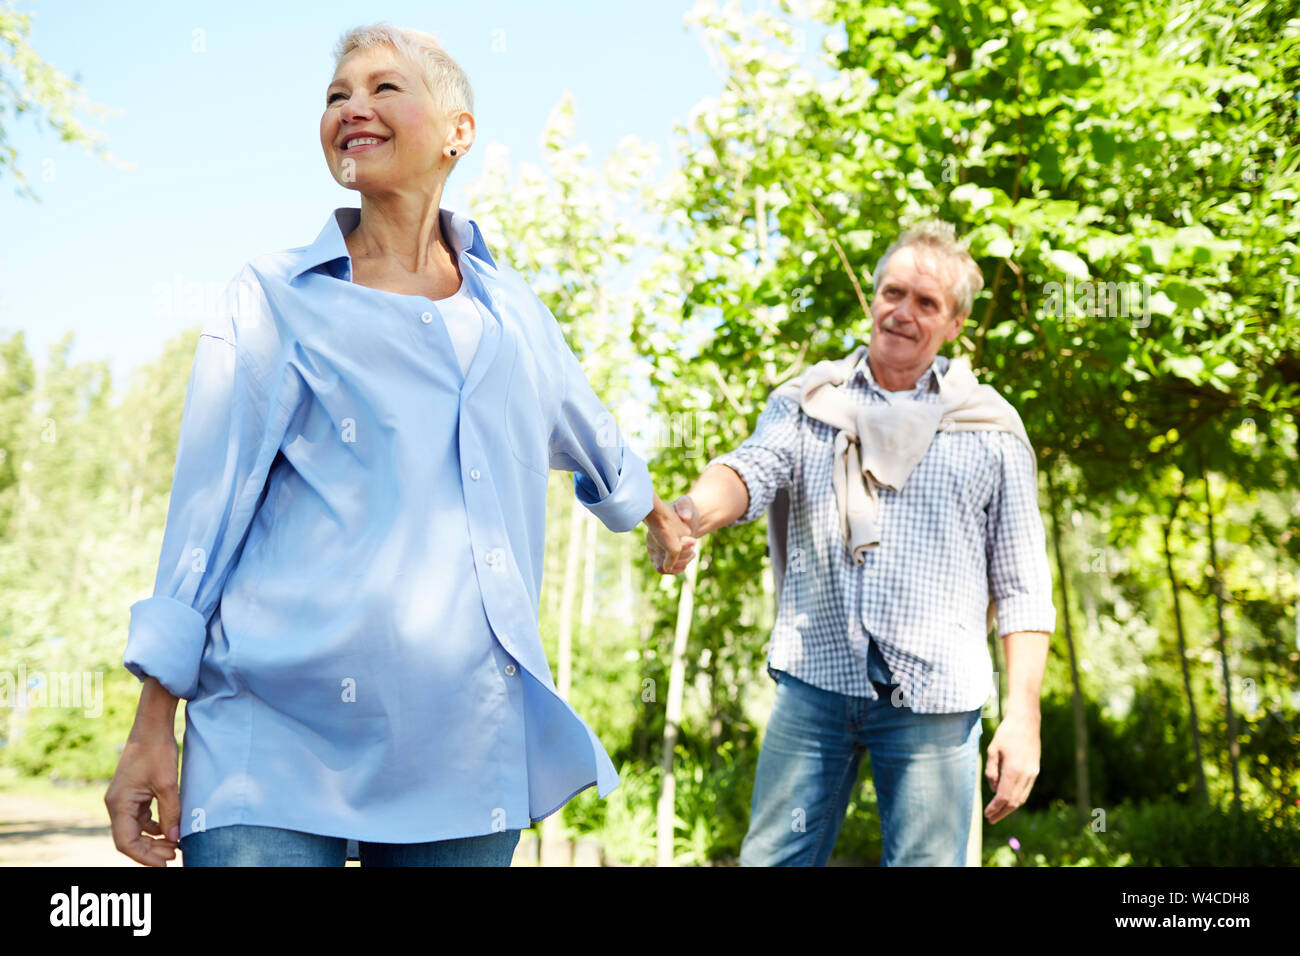 Portrait of happy senior woman leading husband by hand while enjoying walk in Summer park Stock Photo